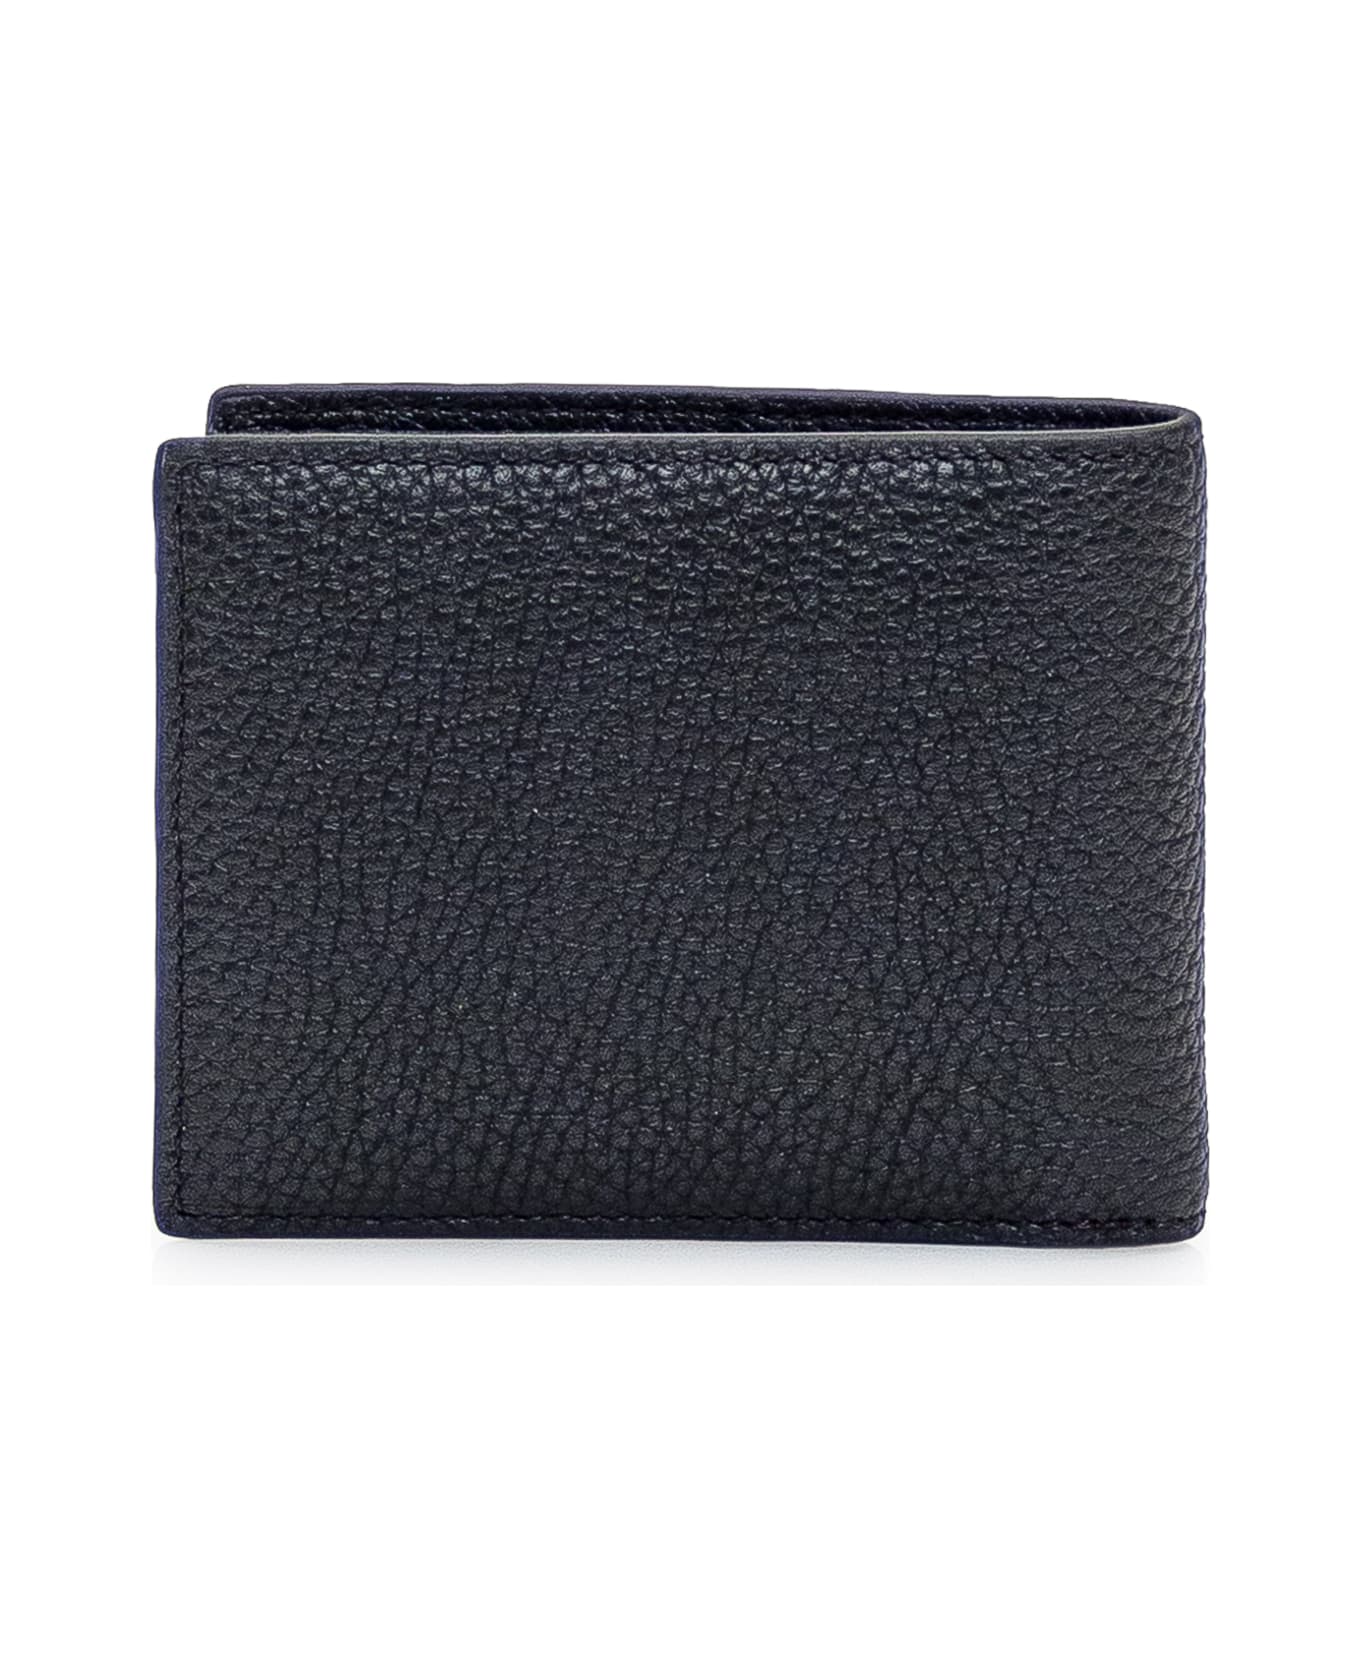 Bally Leather Wallet - BLACK/BALLYRED+PALL 財布